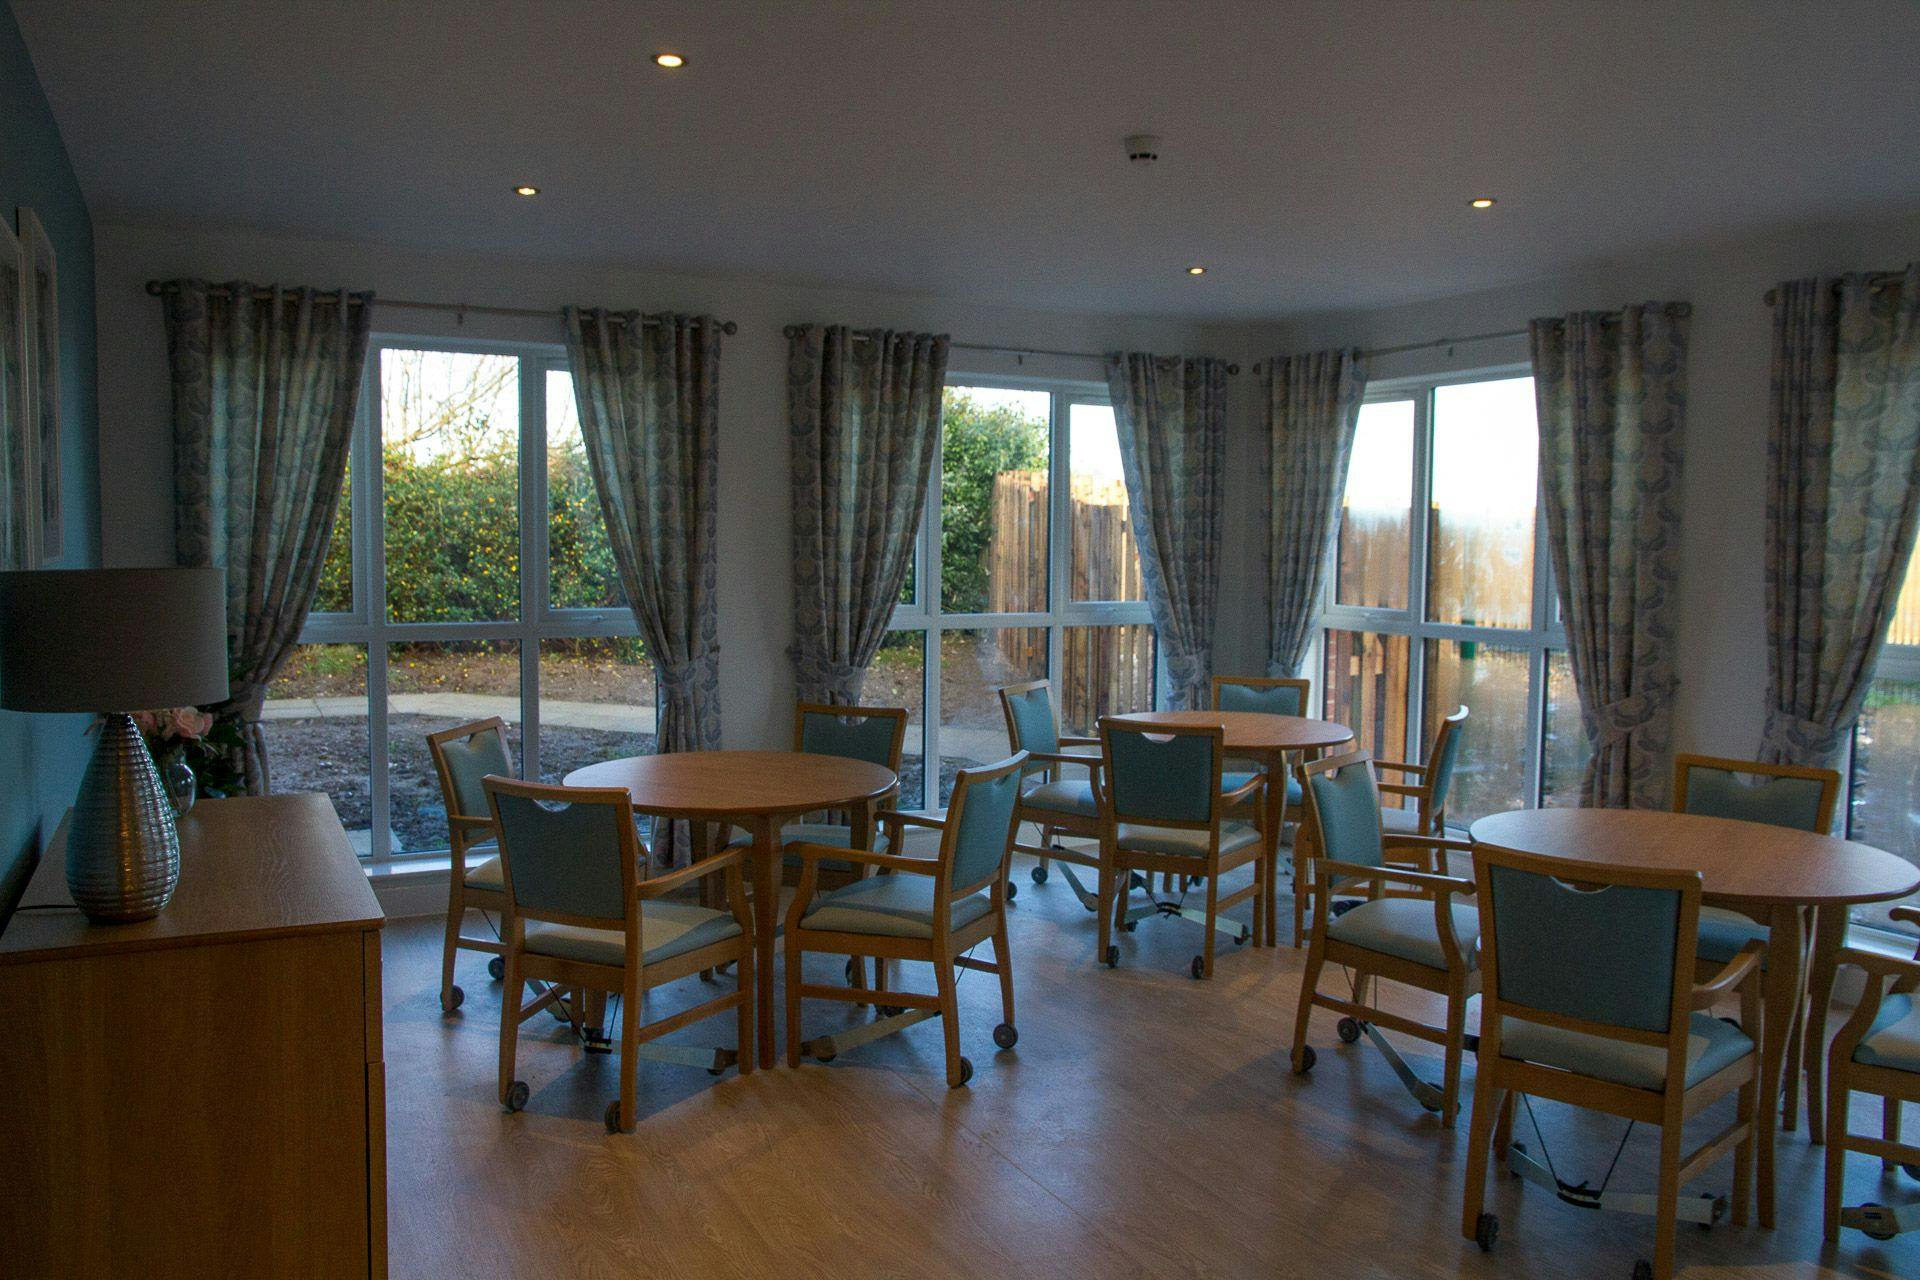 Dining area of Bispham Garden care home in Blackpool, Lancashire